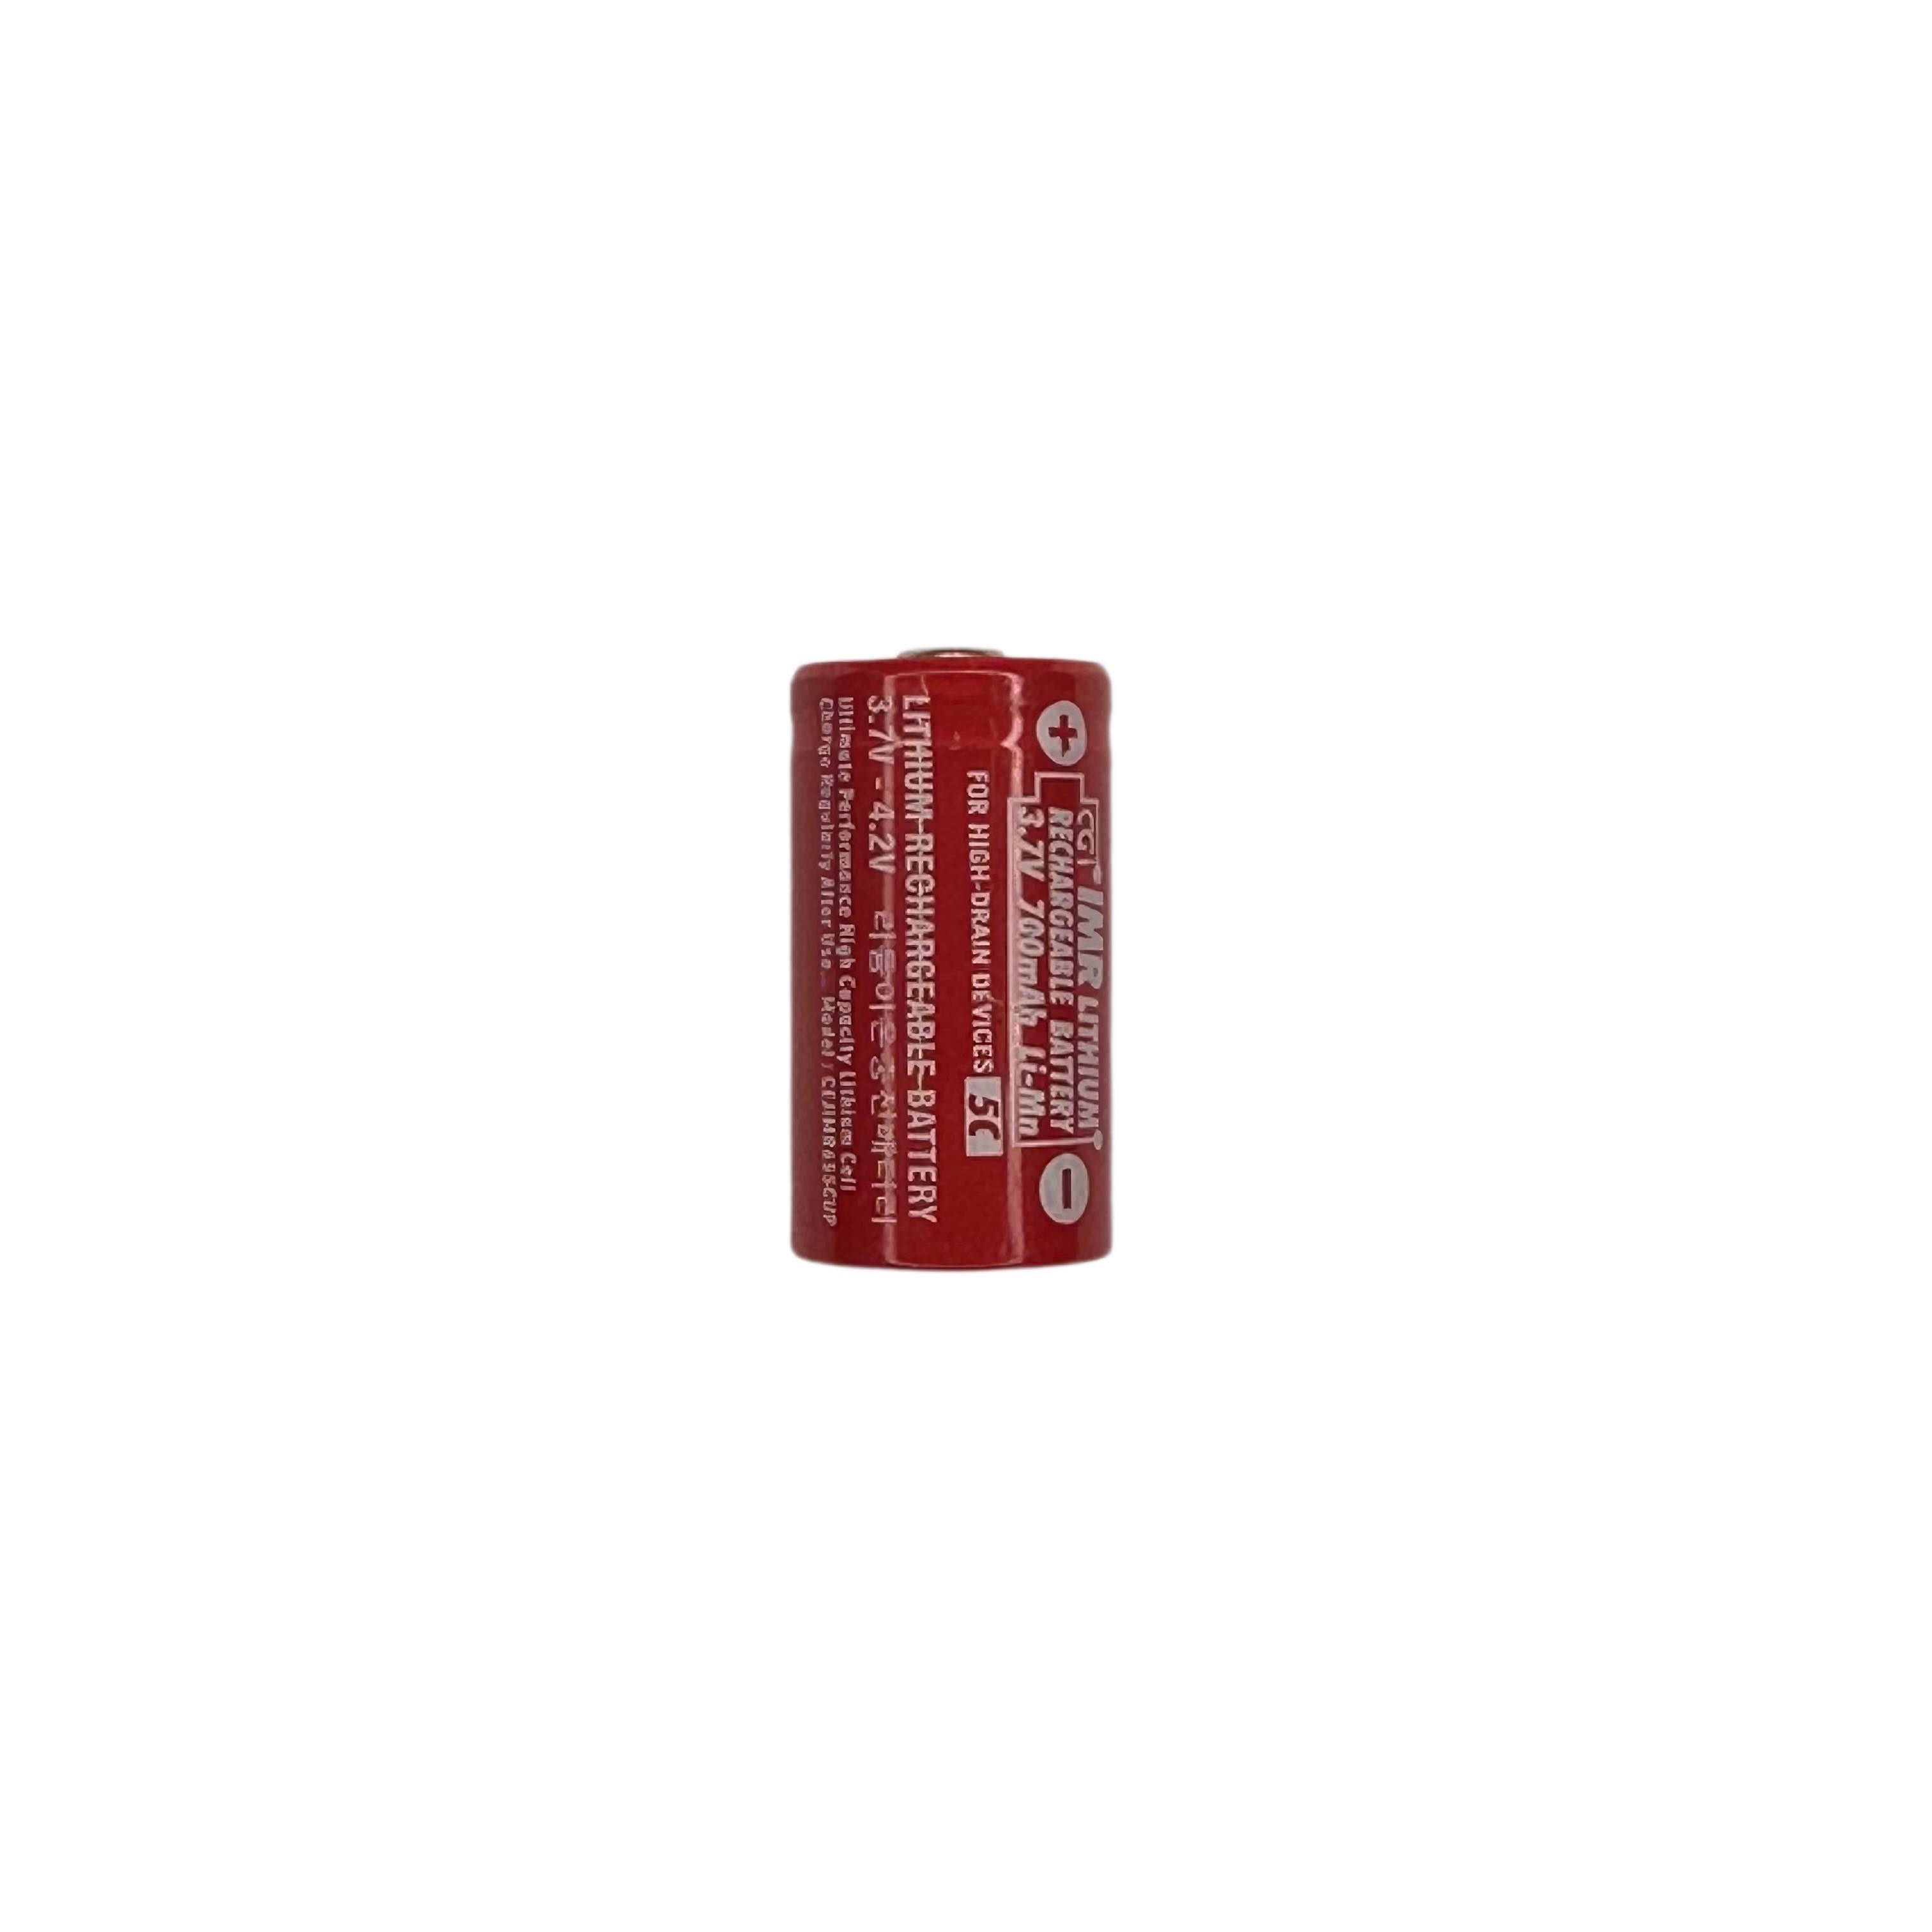 Rechargeable 16340 IMR (RCR123A) (3.7v) Lithium MN - CGI